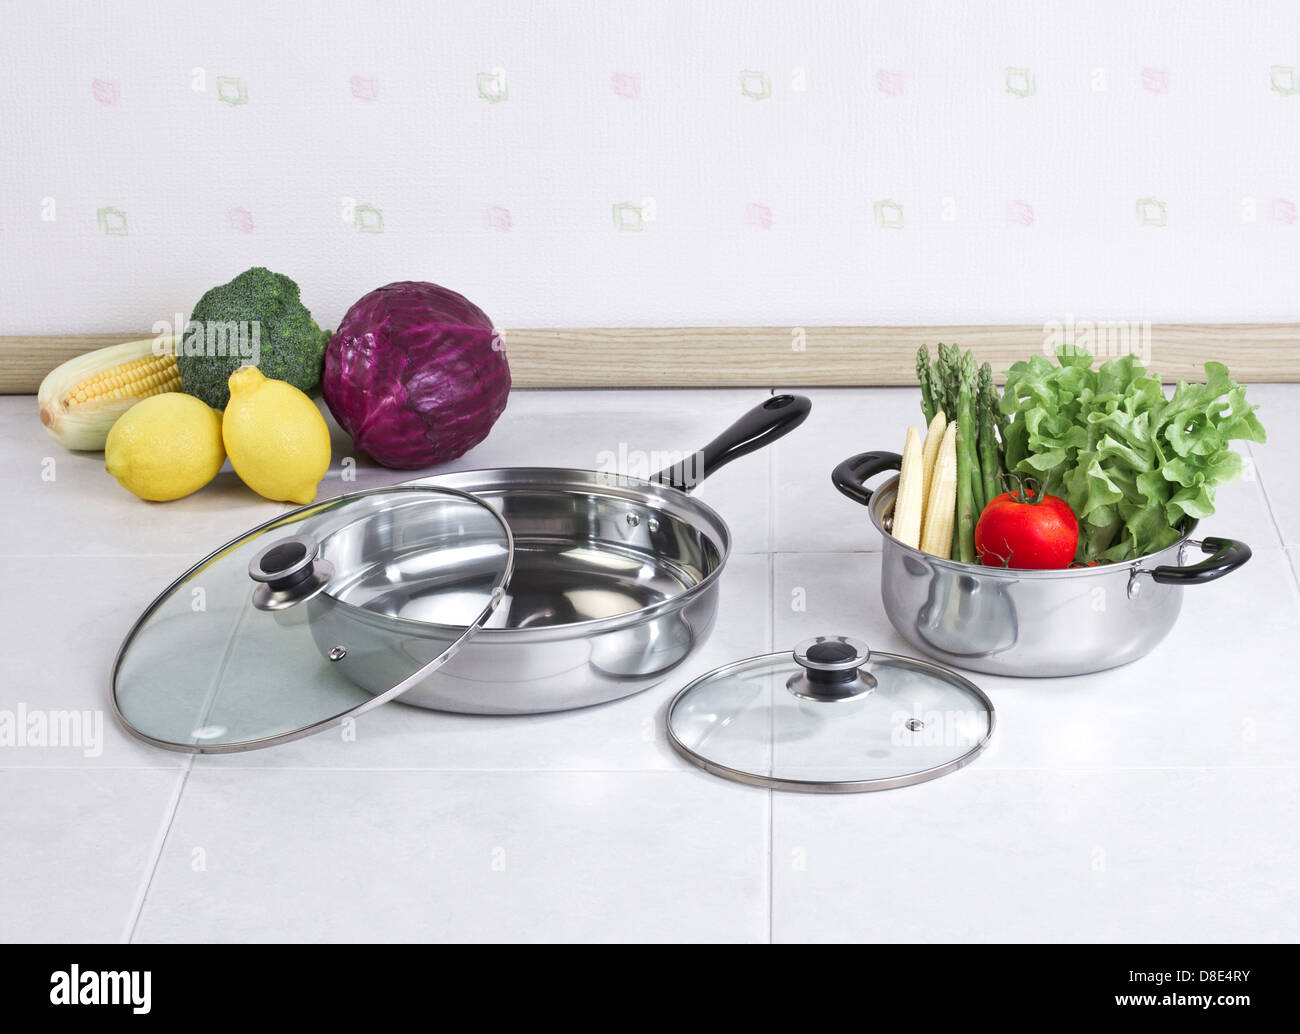 Set of stainless pot and pan with glass lids and vegetables Stock Photo